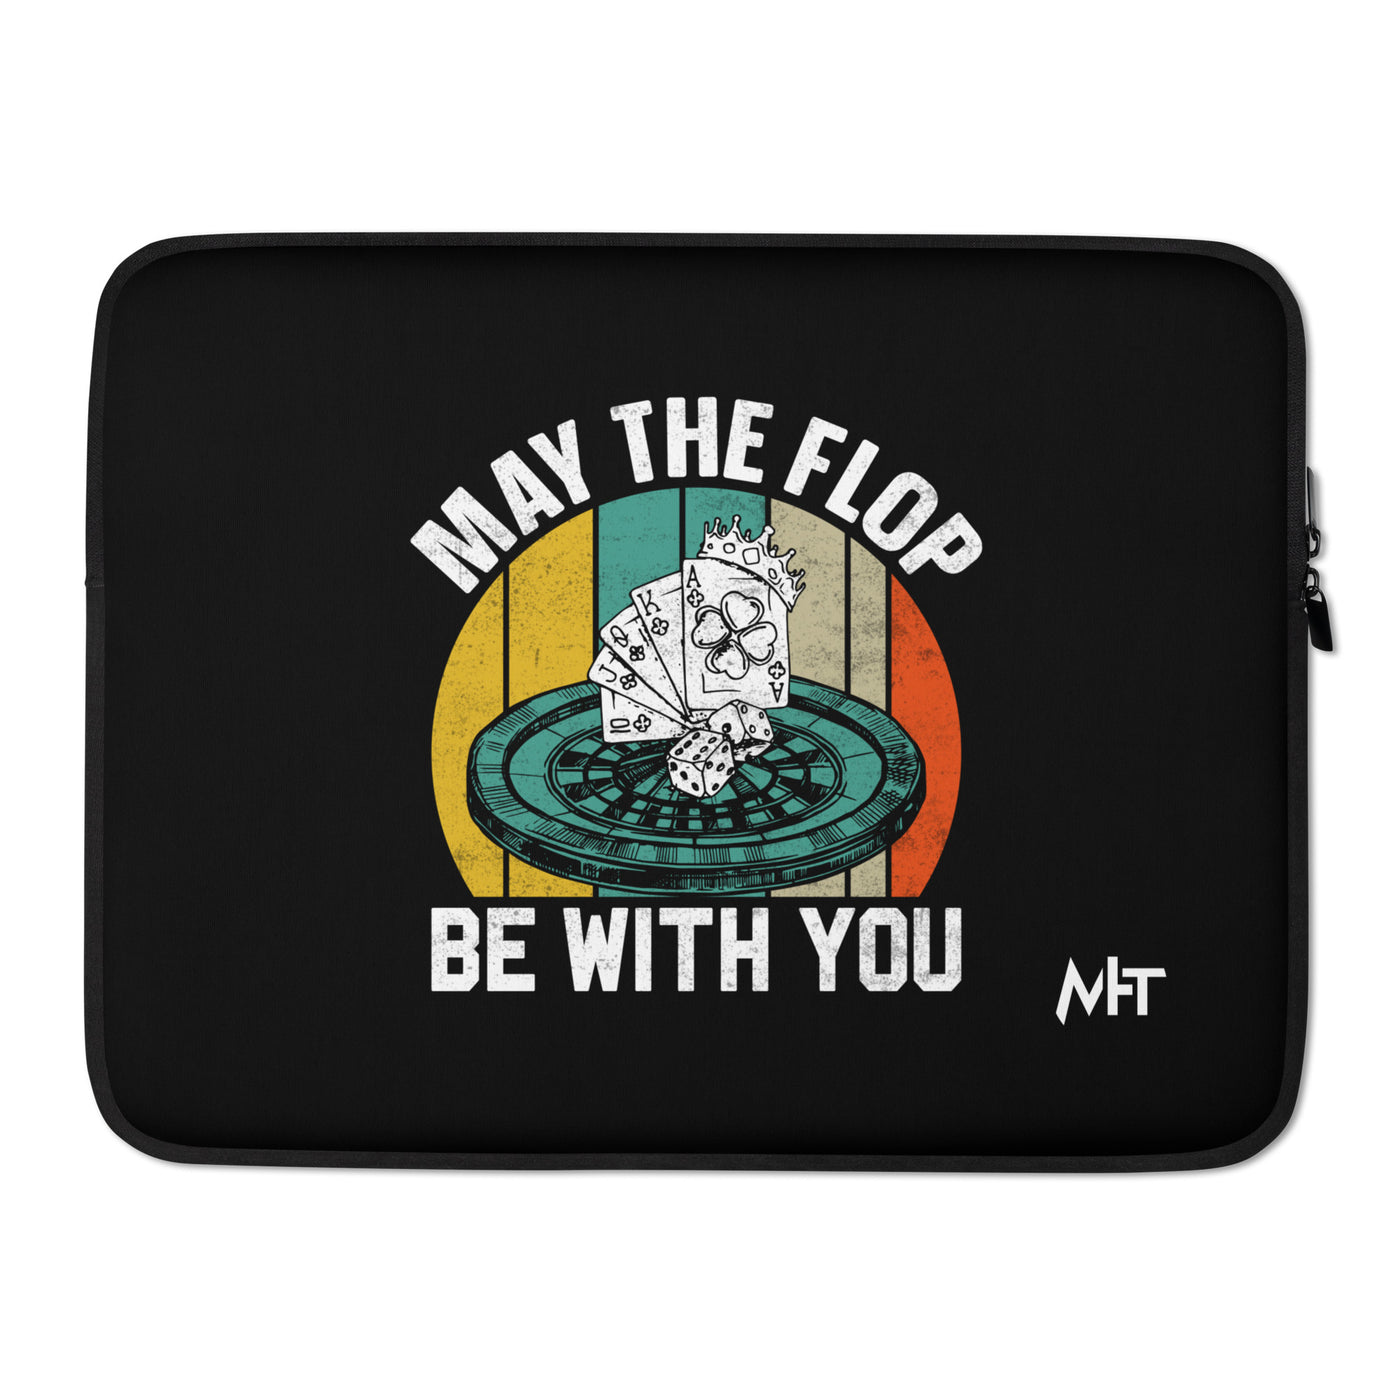 May the Flop be with you - Laptop Sleeve